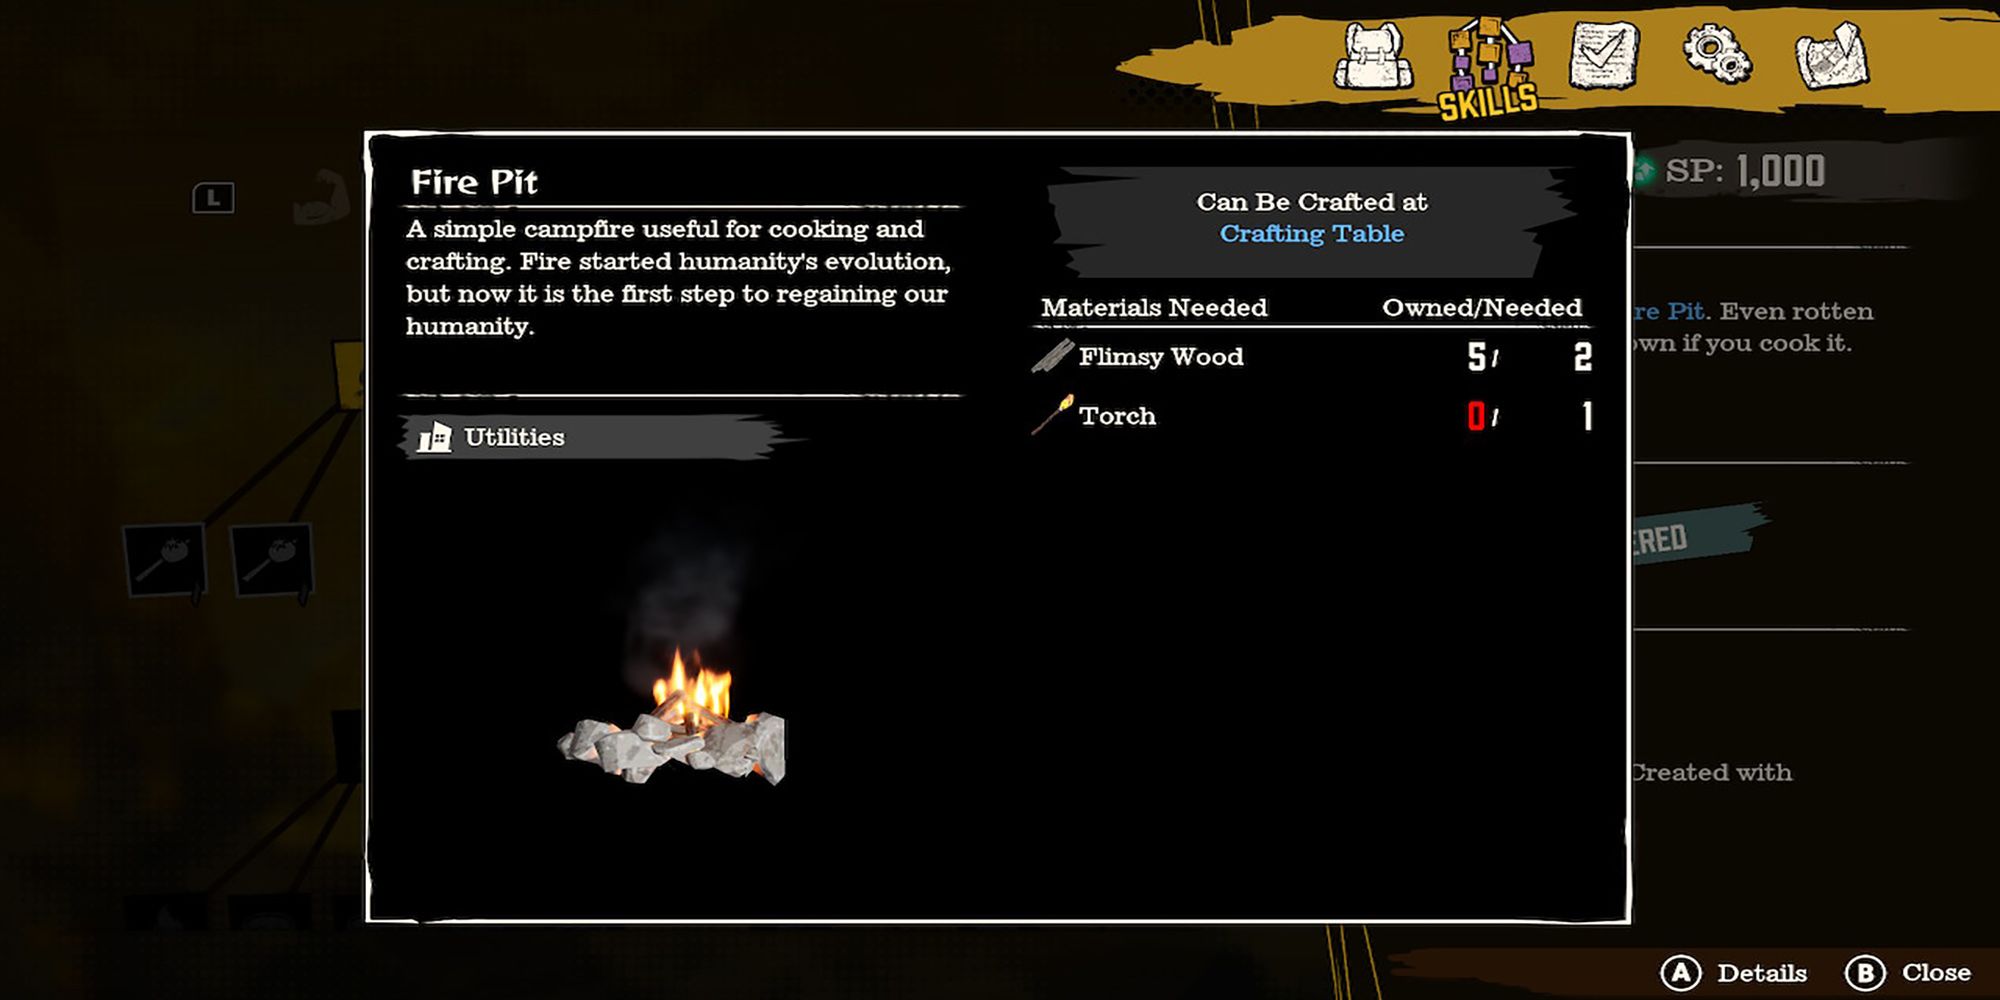 A breakdown of the Fire Pit via the View Craftables function in Deadcraft's Skills menu.